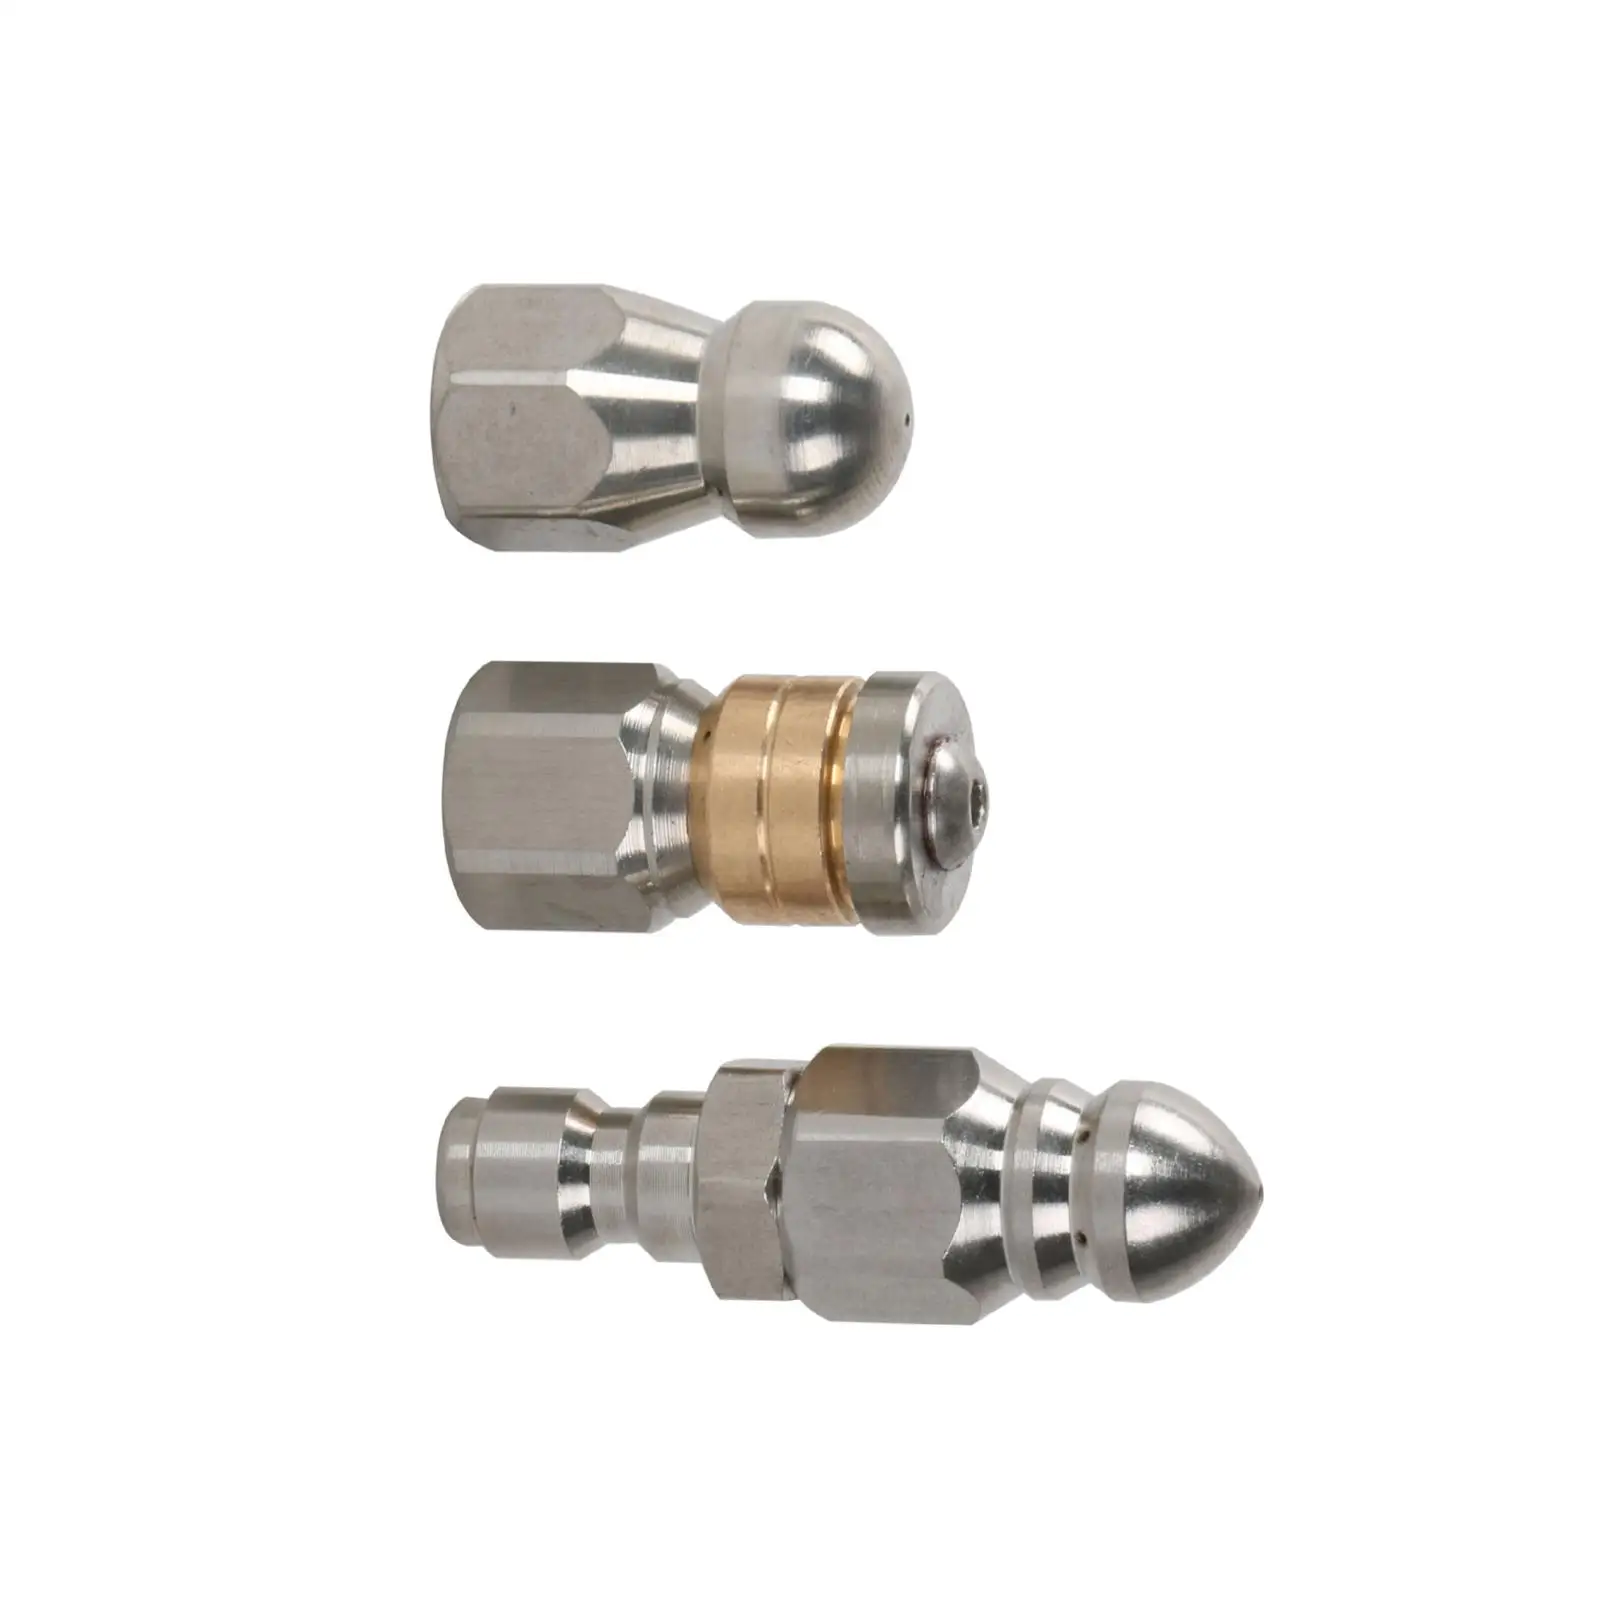 3 Pieces Sewer Jet Nozzle Drain Cleaning Nozzle for Driveway Sewer Lawns